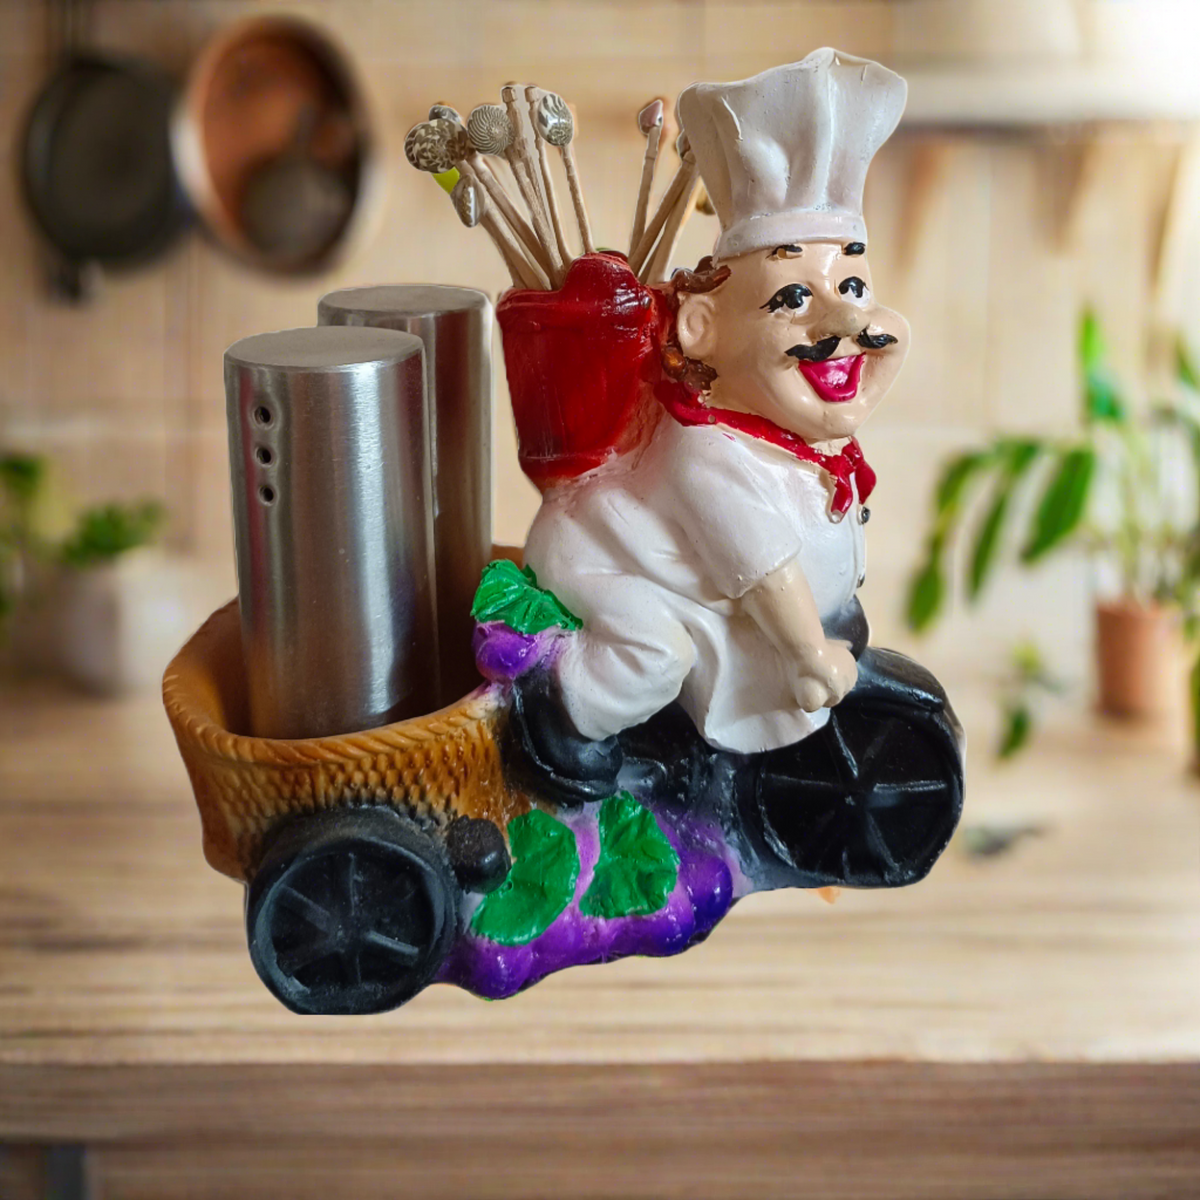 Chef on Bicycle